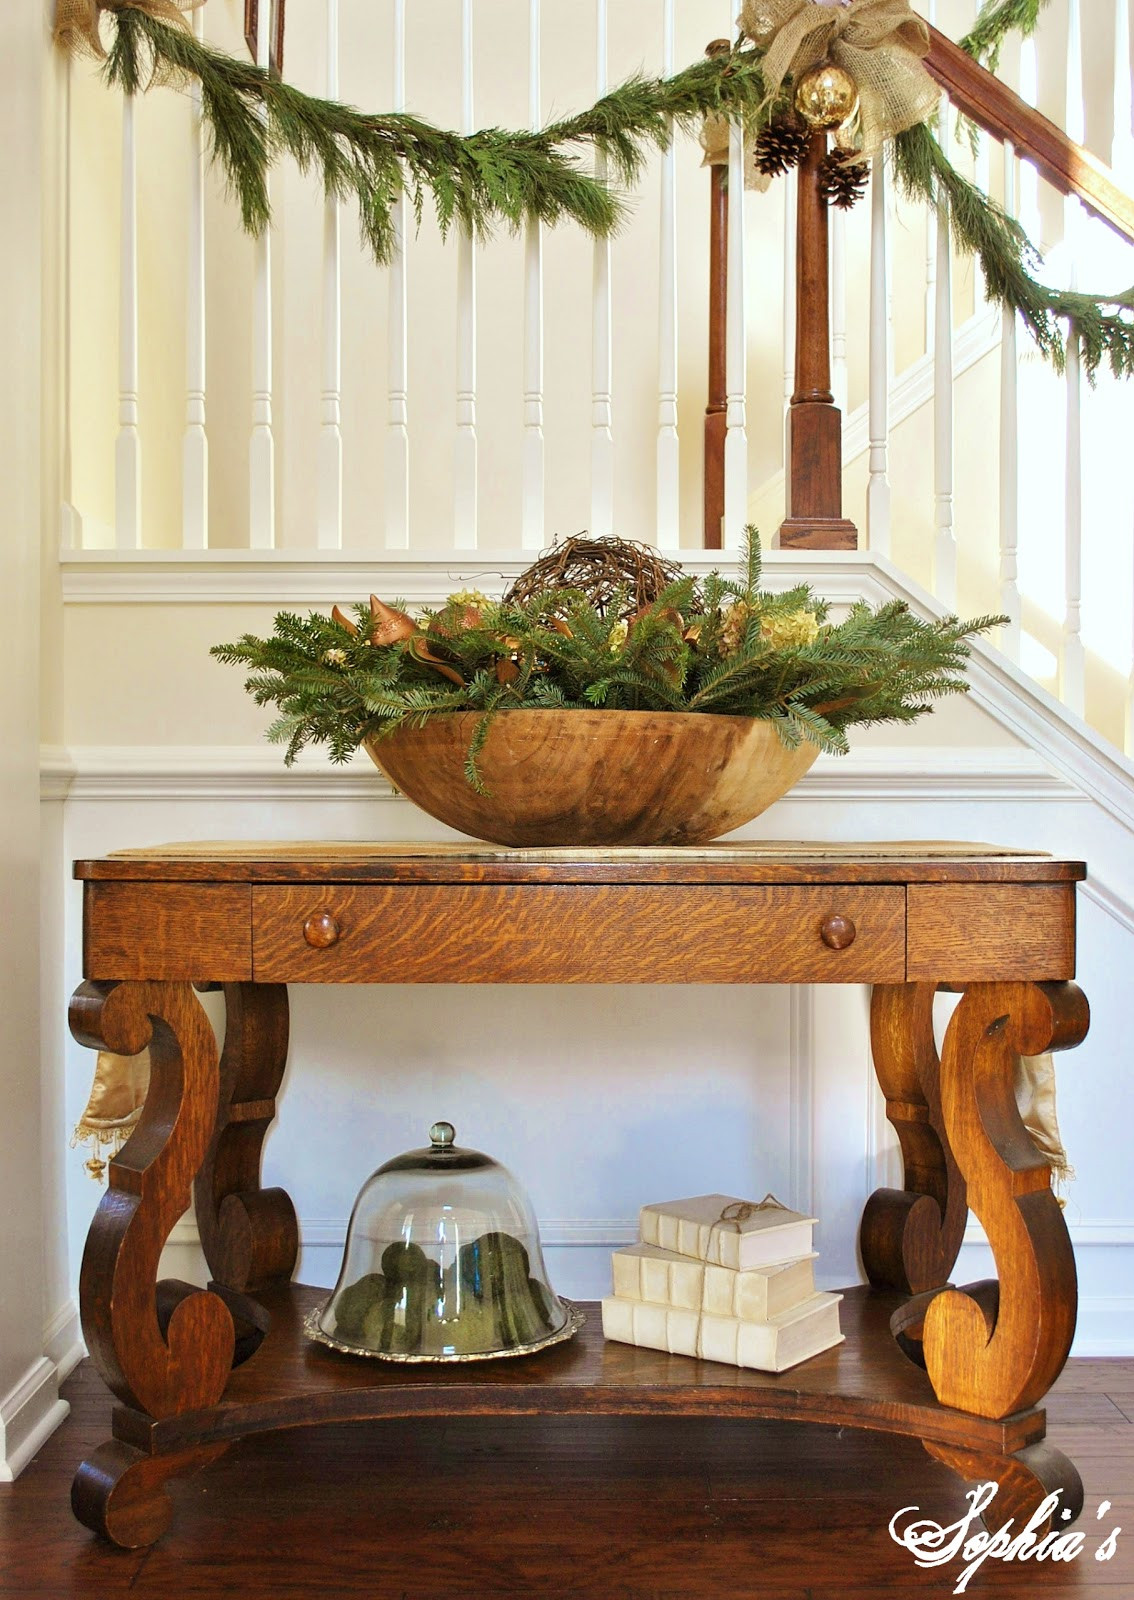 Christmas Foyer Decorating Ideas
 Sophia s Christmas Stairs and Entryway